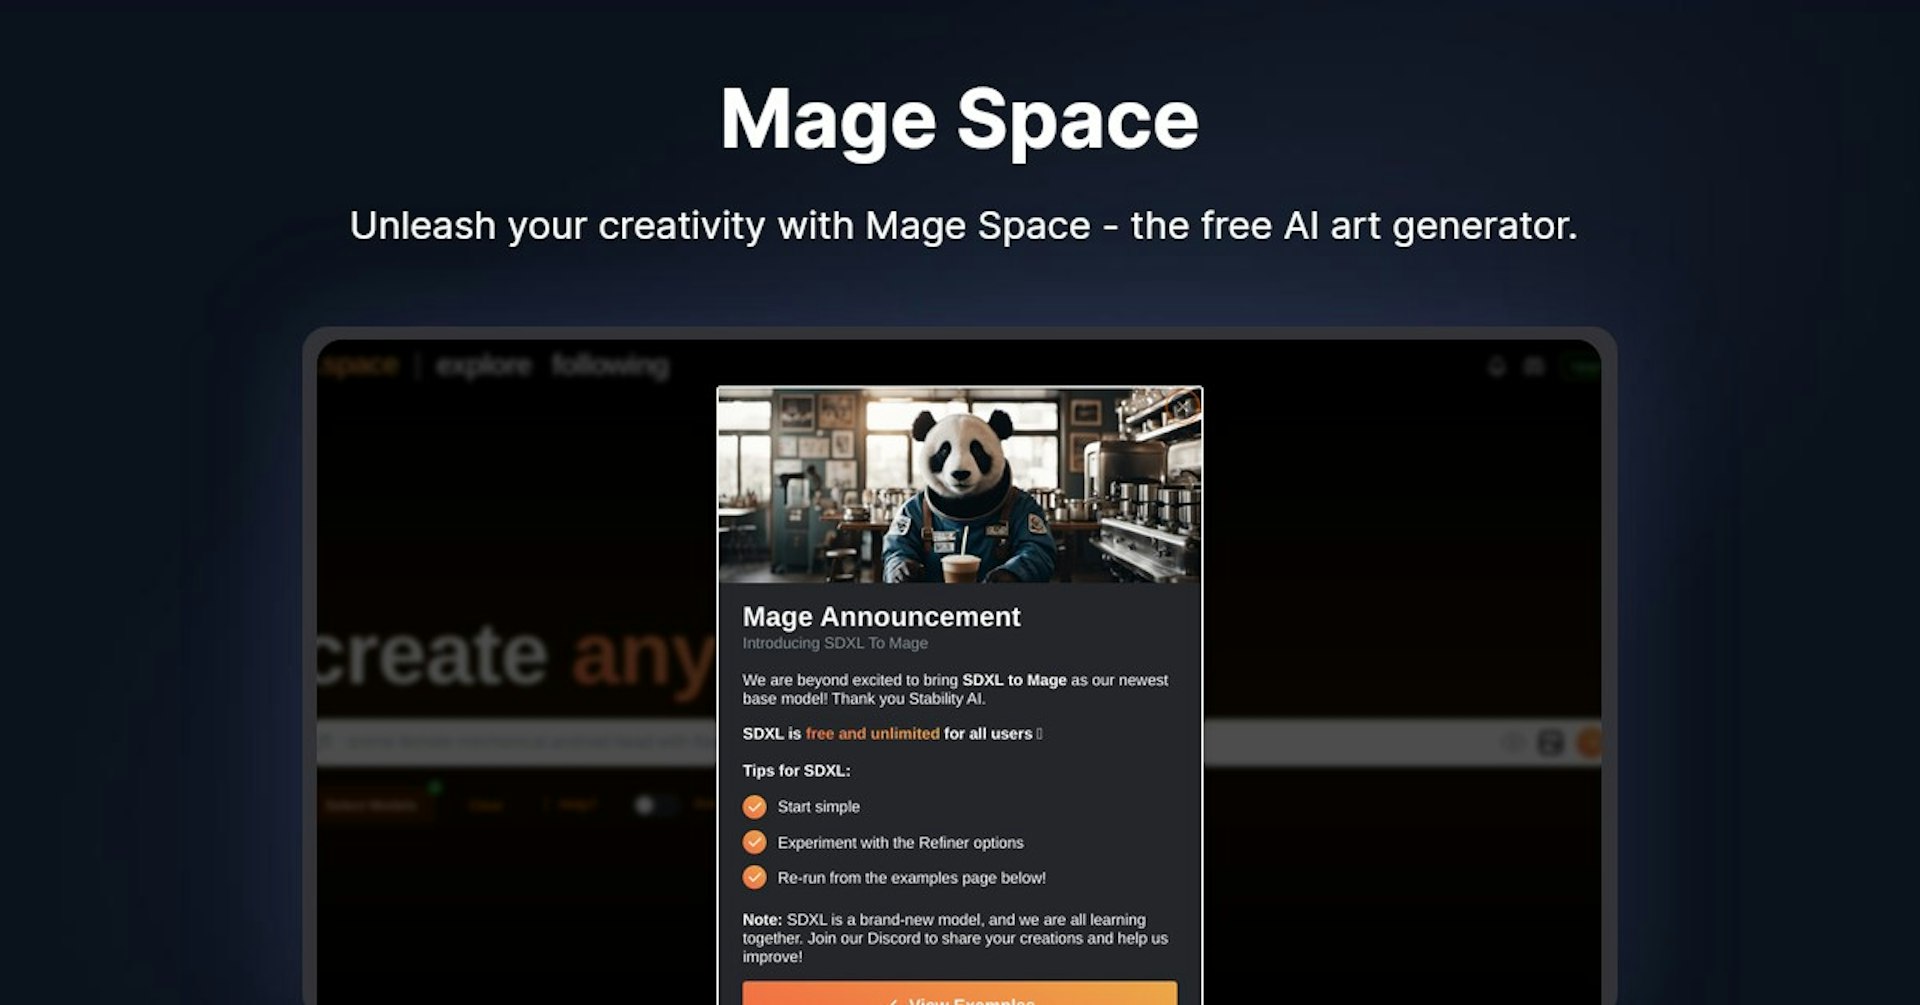 Mage Space